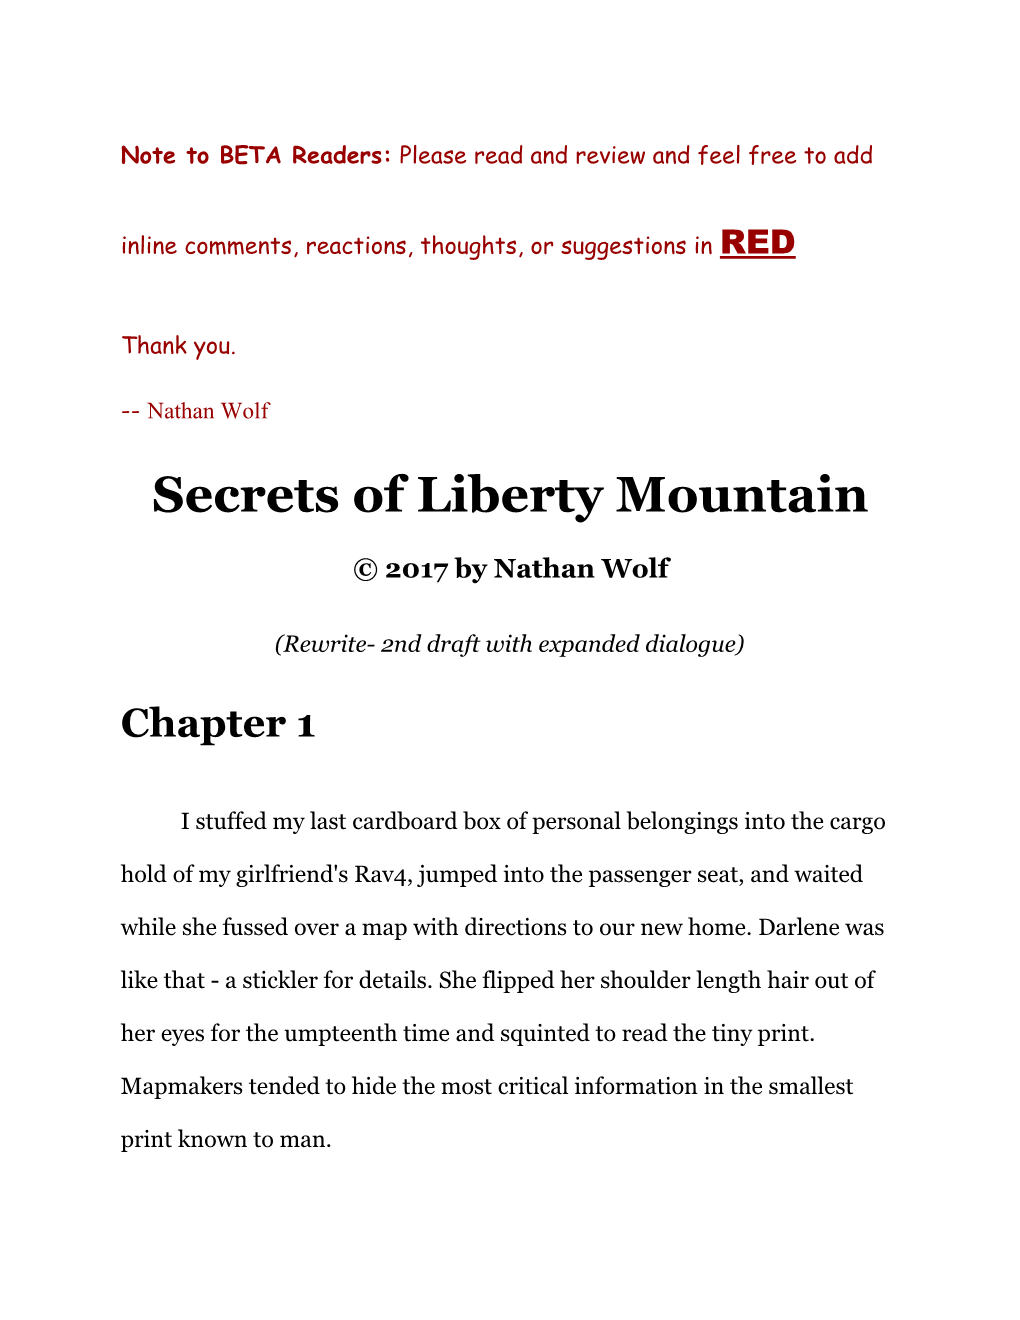 Secrets of Liberty Mountain 2017 by Nathan Wolf